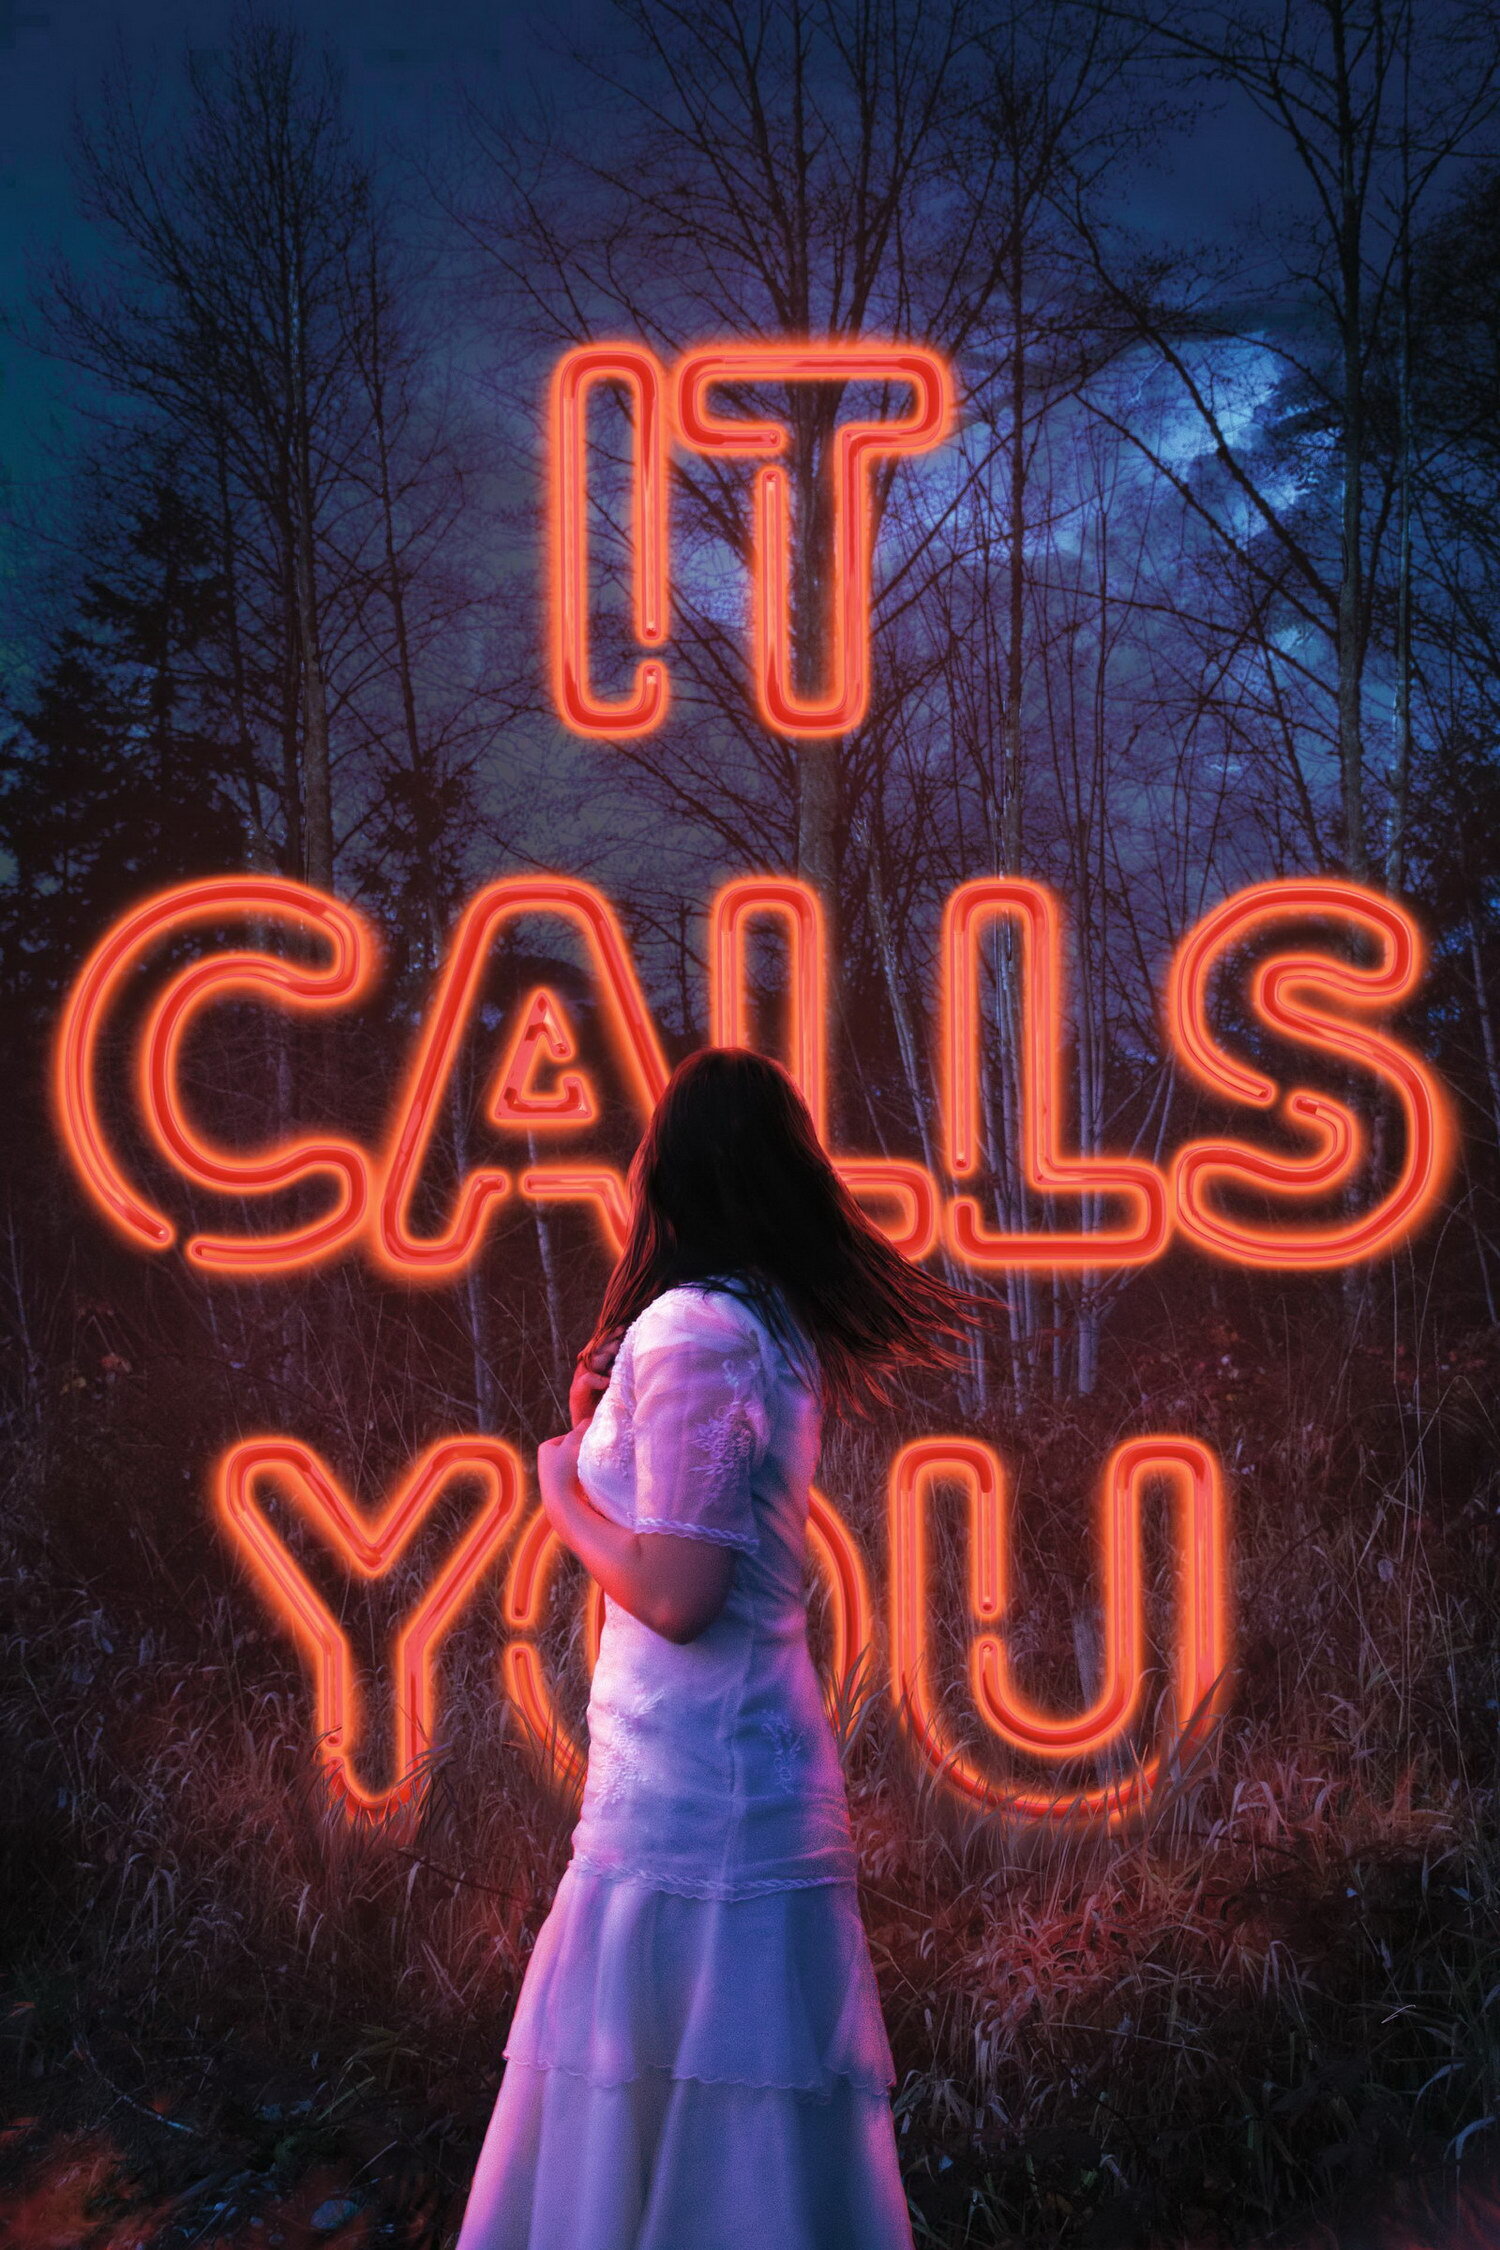 “It Calls You” (Typography) by Talia Rouck